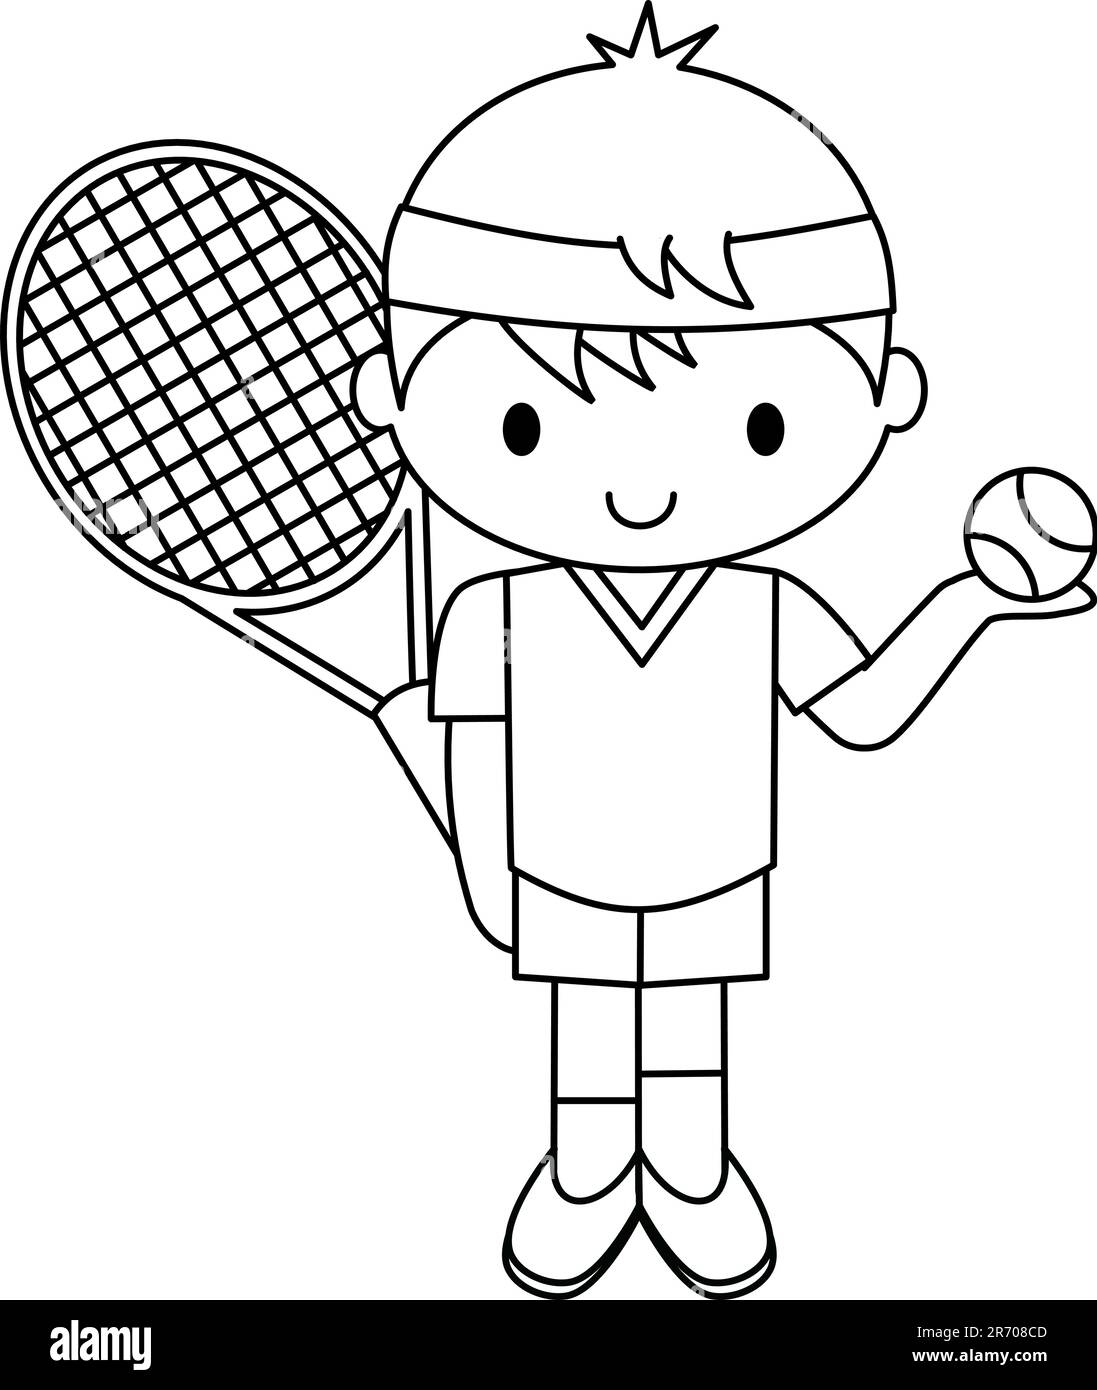 Black and White Illustration a Tennis player boy Stock Vector